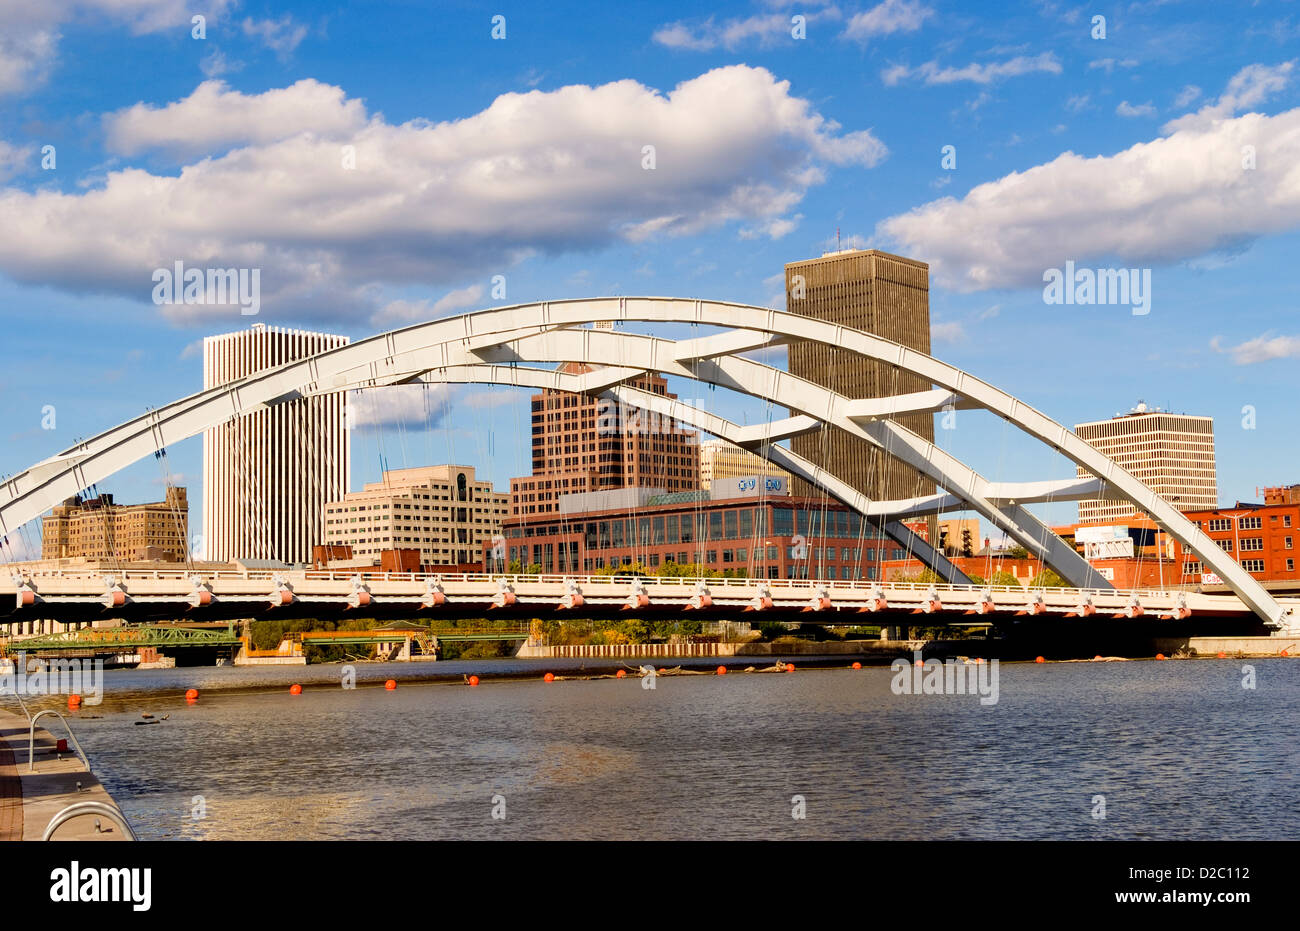 Rochester New York Skyline With The Genesee River And The Susan B. Anthony And Fredrick Douglas Bridge Stock Photo